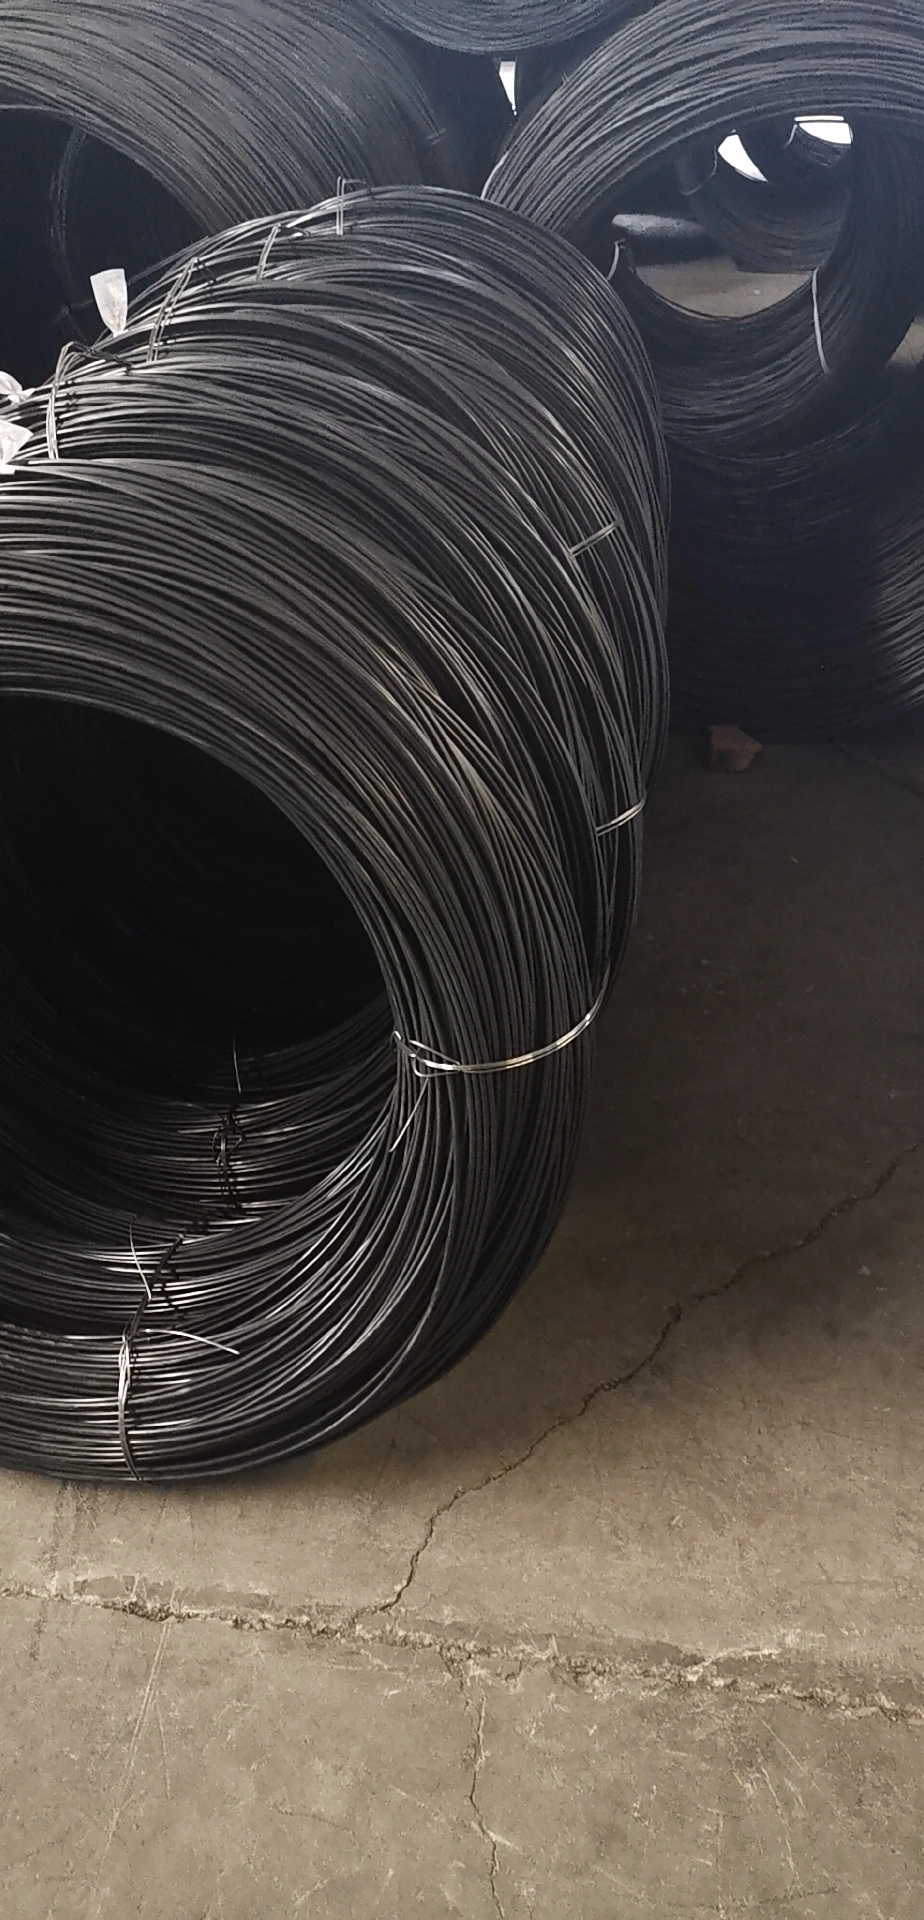 High Quality Hot Sale SAE 1008 Wire Rod 5.5mm 6.5mm Hot Rolled Wire Rod Q195 SAE1008 in Stock High Strength 4mm Steel Wire Carbon Steel Wire Rod